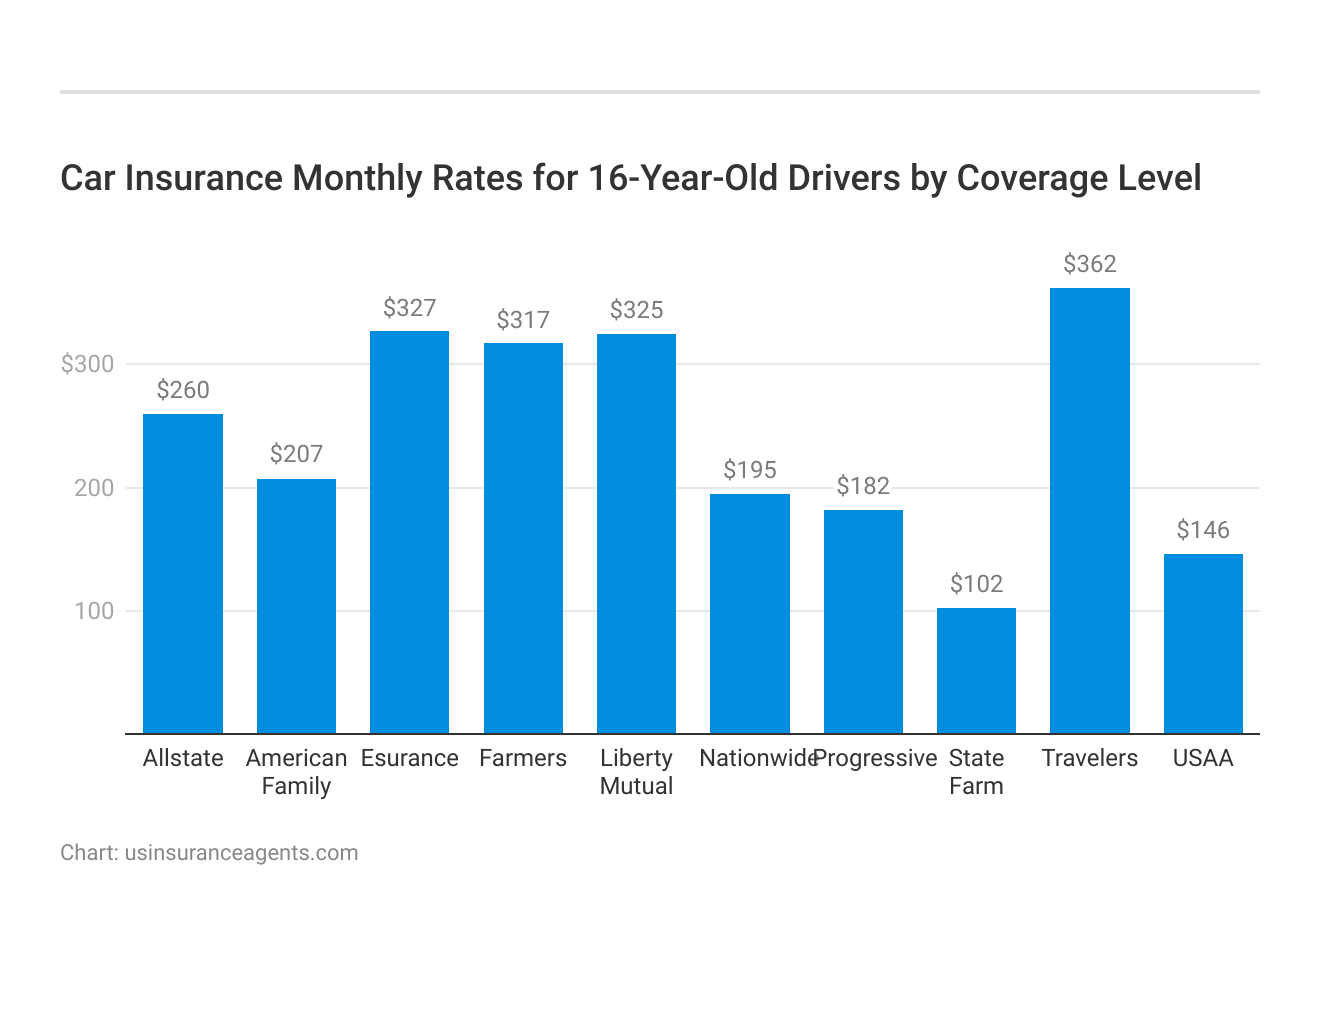 <h3>Car Insurance Monthly Rates for 16-Year-Old Drivers by Coverage Level</h3>